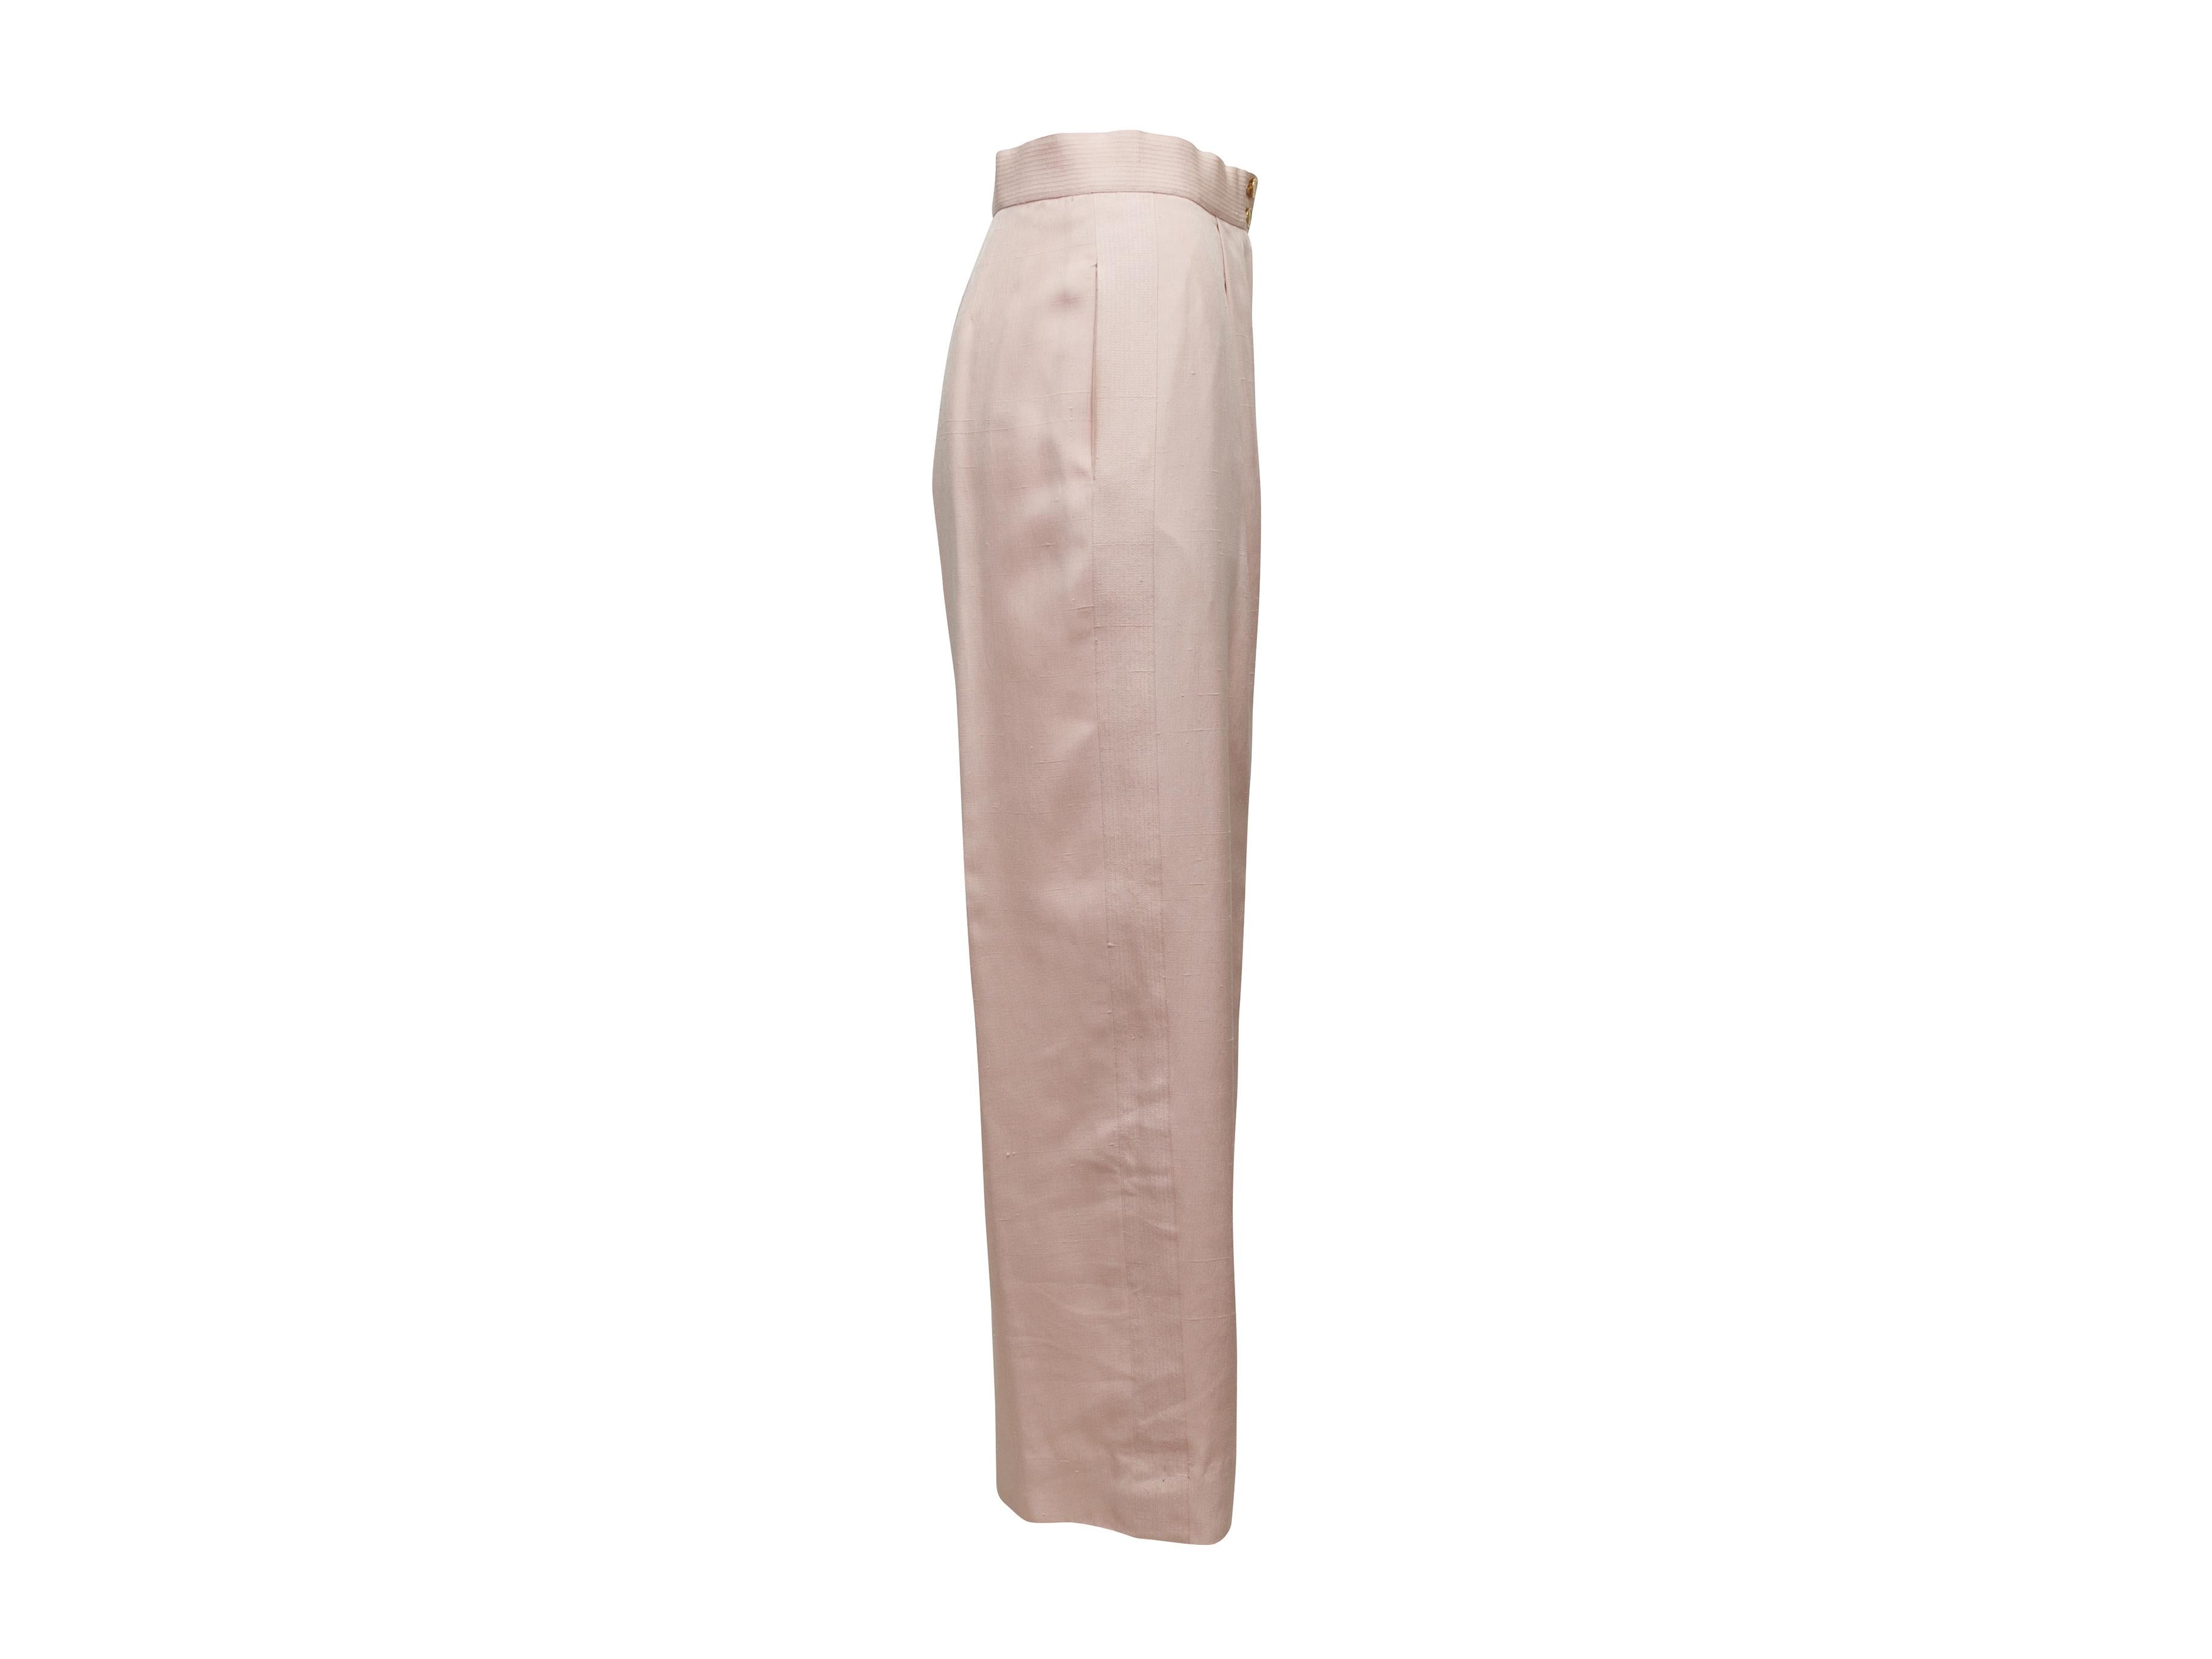 Product details: Vintage light pink silk wide-leg pants by Chanel. Zipper and gold-tone CC button closures at front. 27